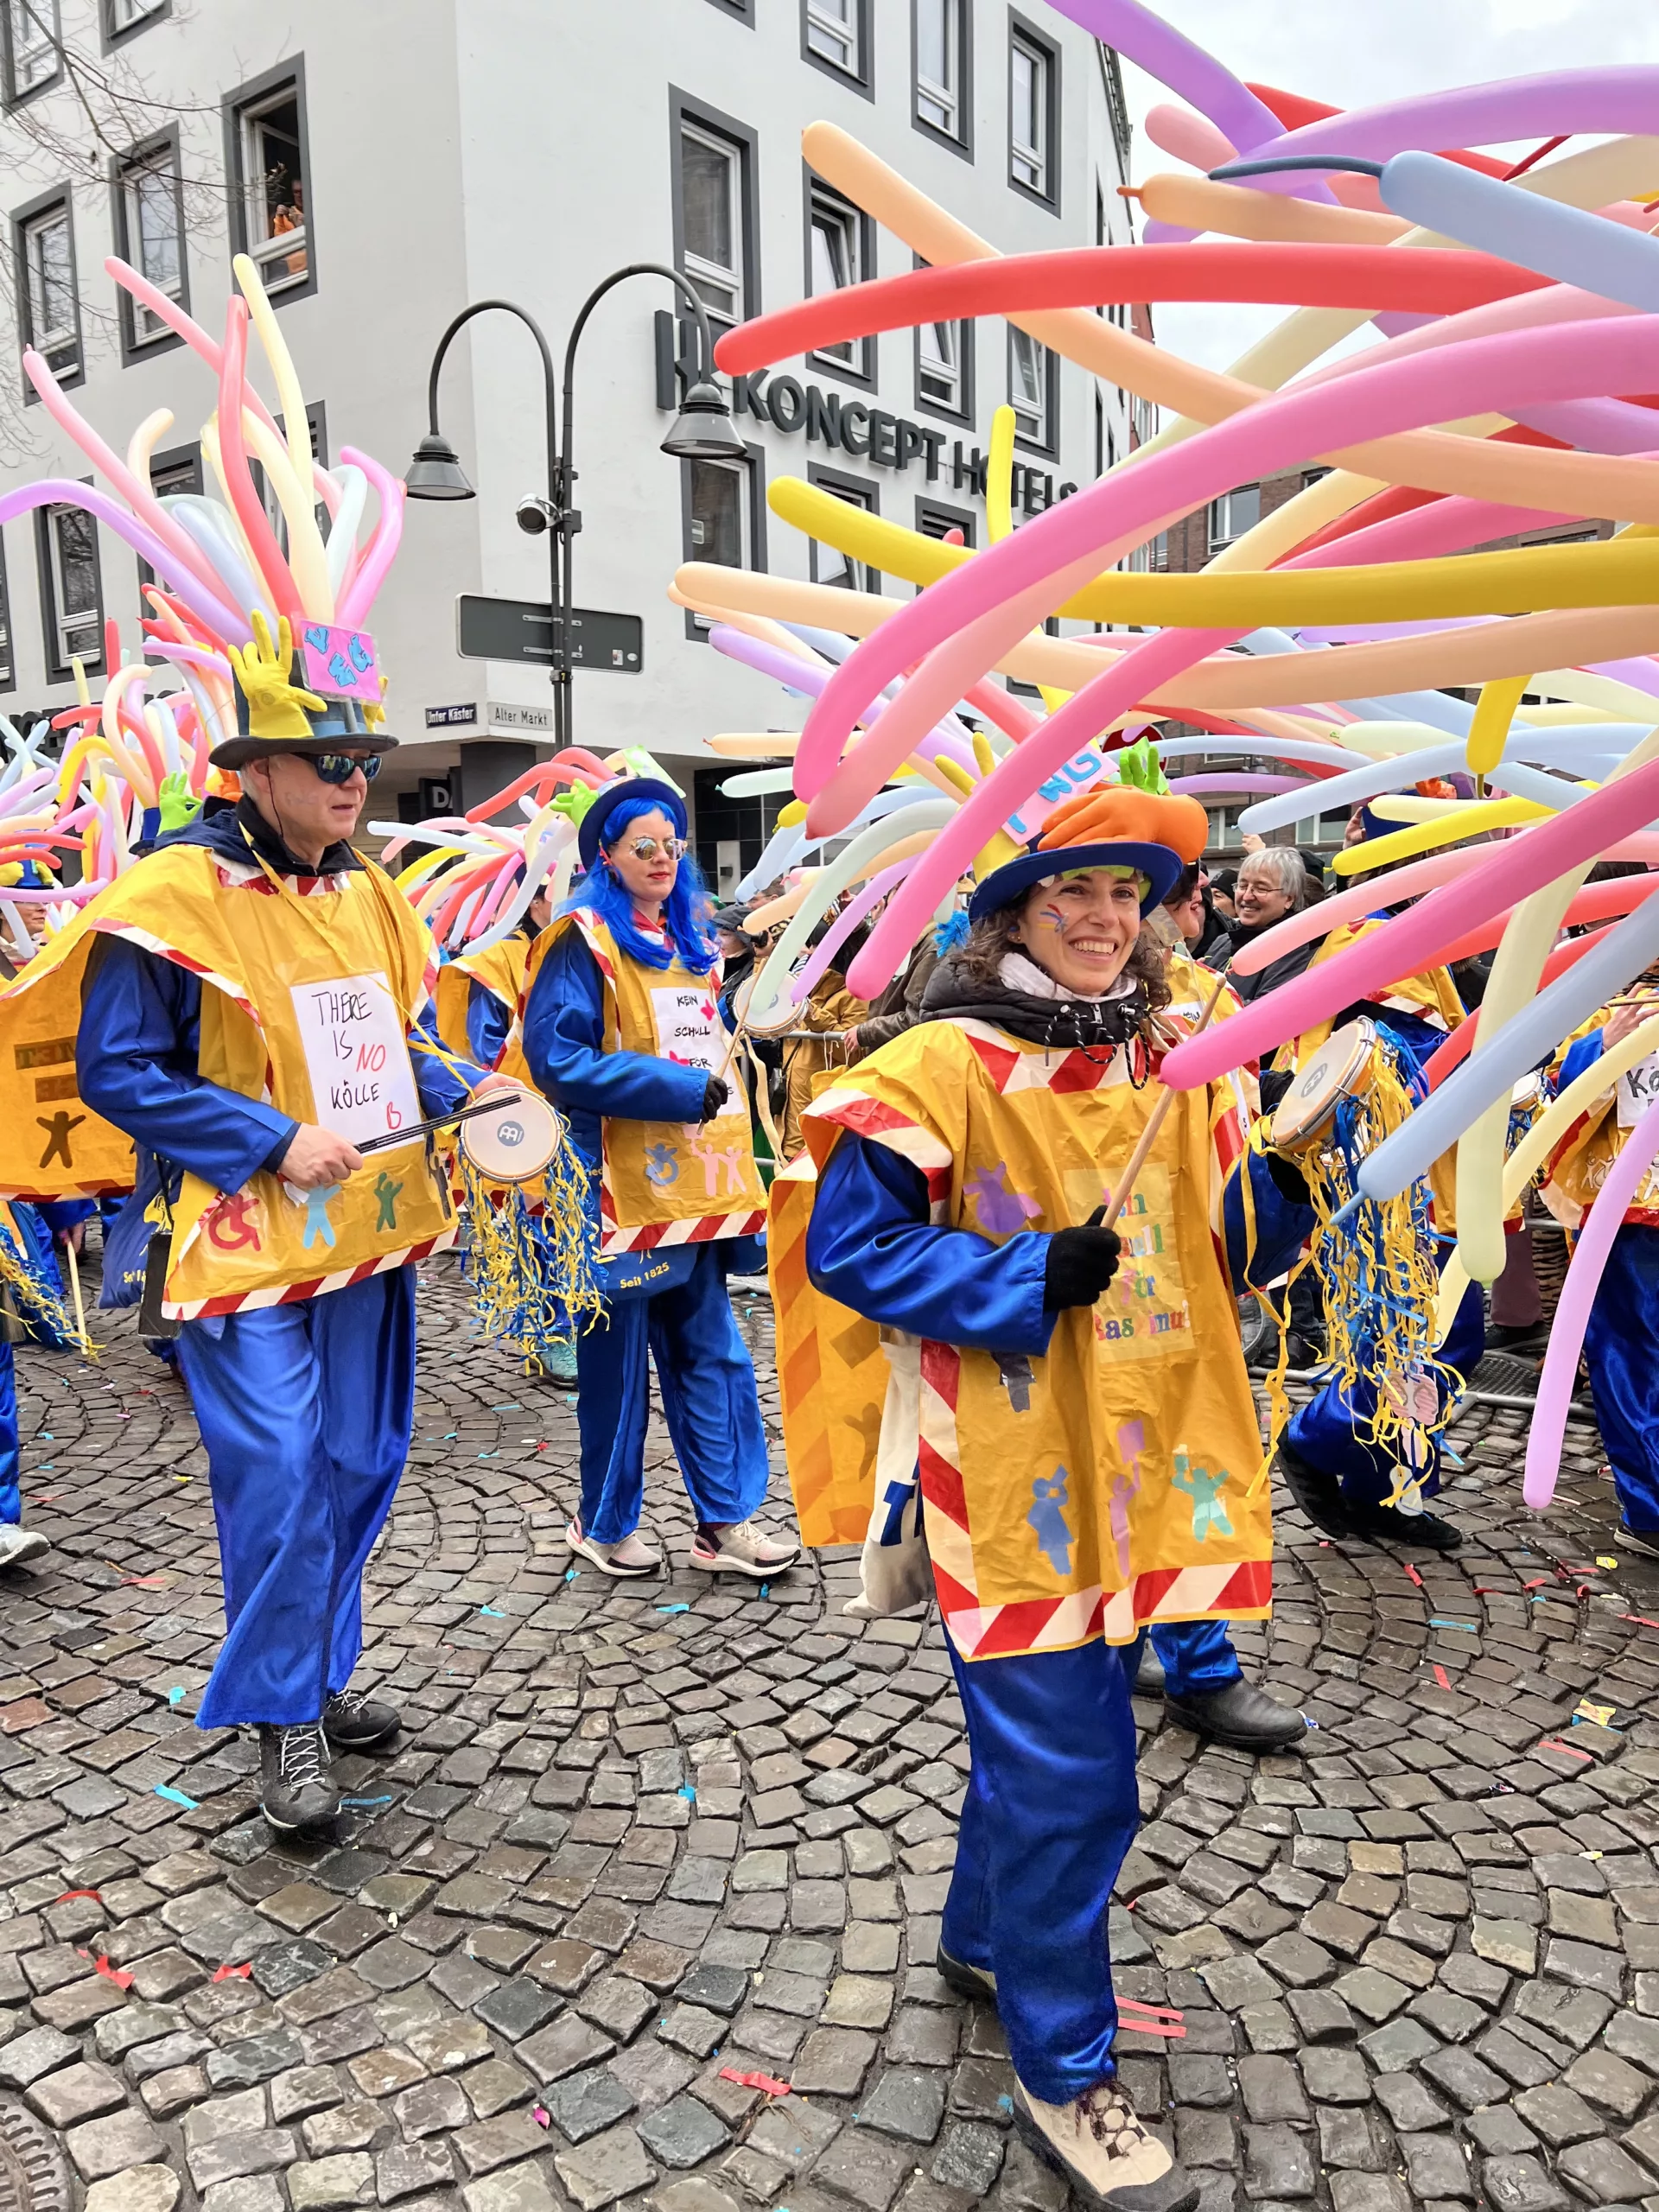 Carnival in Cologne - the costumes and floats from the Schull- un Veedelszöch Zug were so imaginative, colourful and creative!